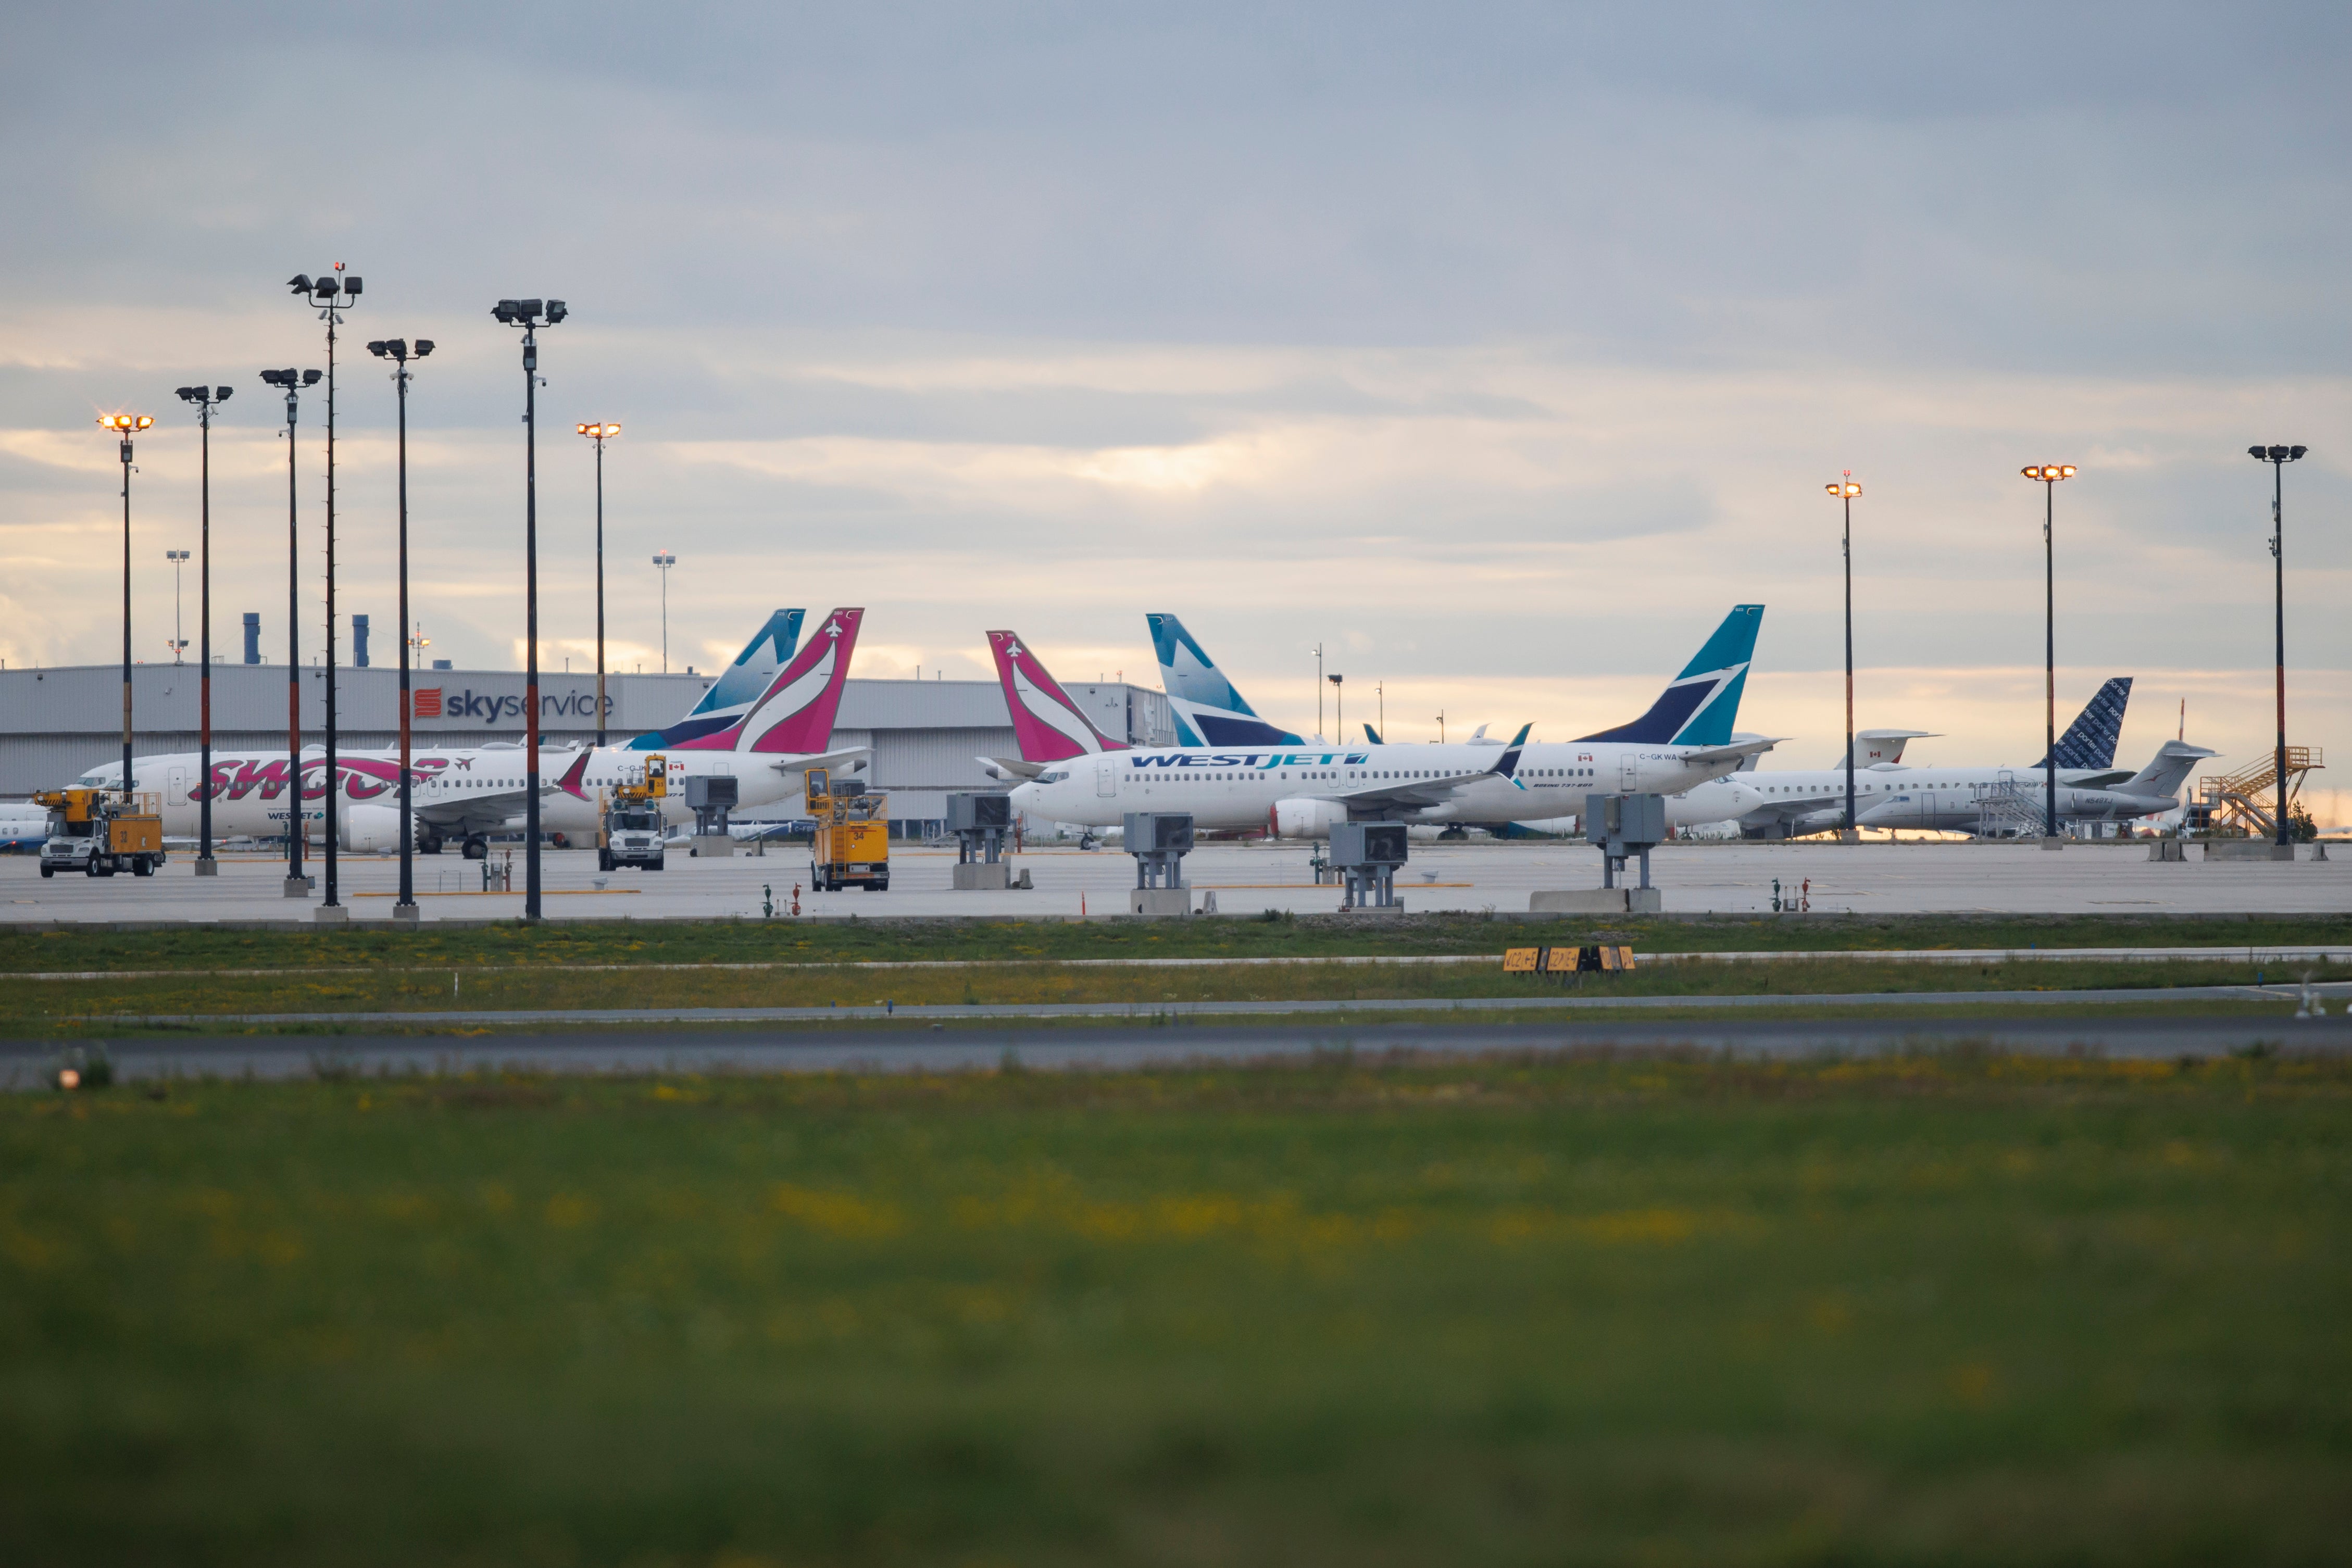 Westjet planes are seen parked at a Westjet hangar at Toronto Pearson International airport on Sunday. WestJet canceled 832 flights between last Thursday and Tuesday, over the country’s Canada Day holiday weekend.